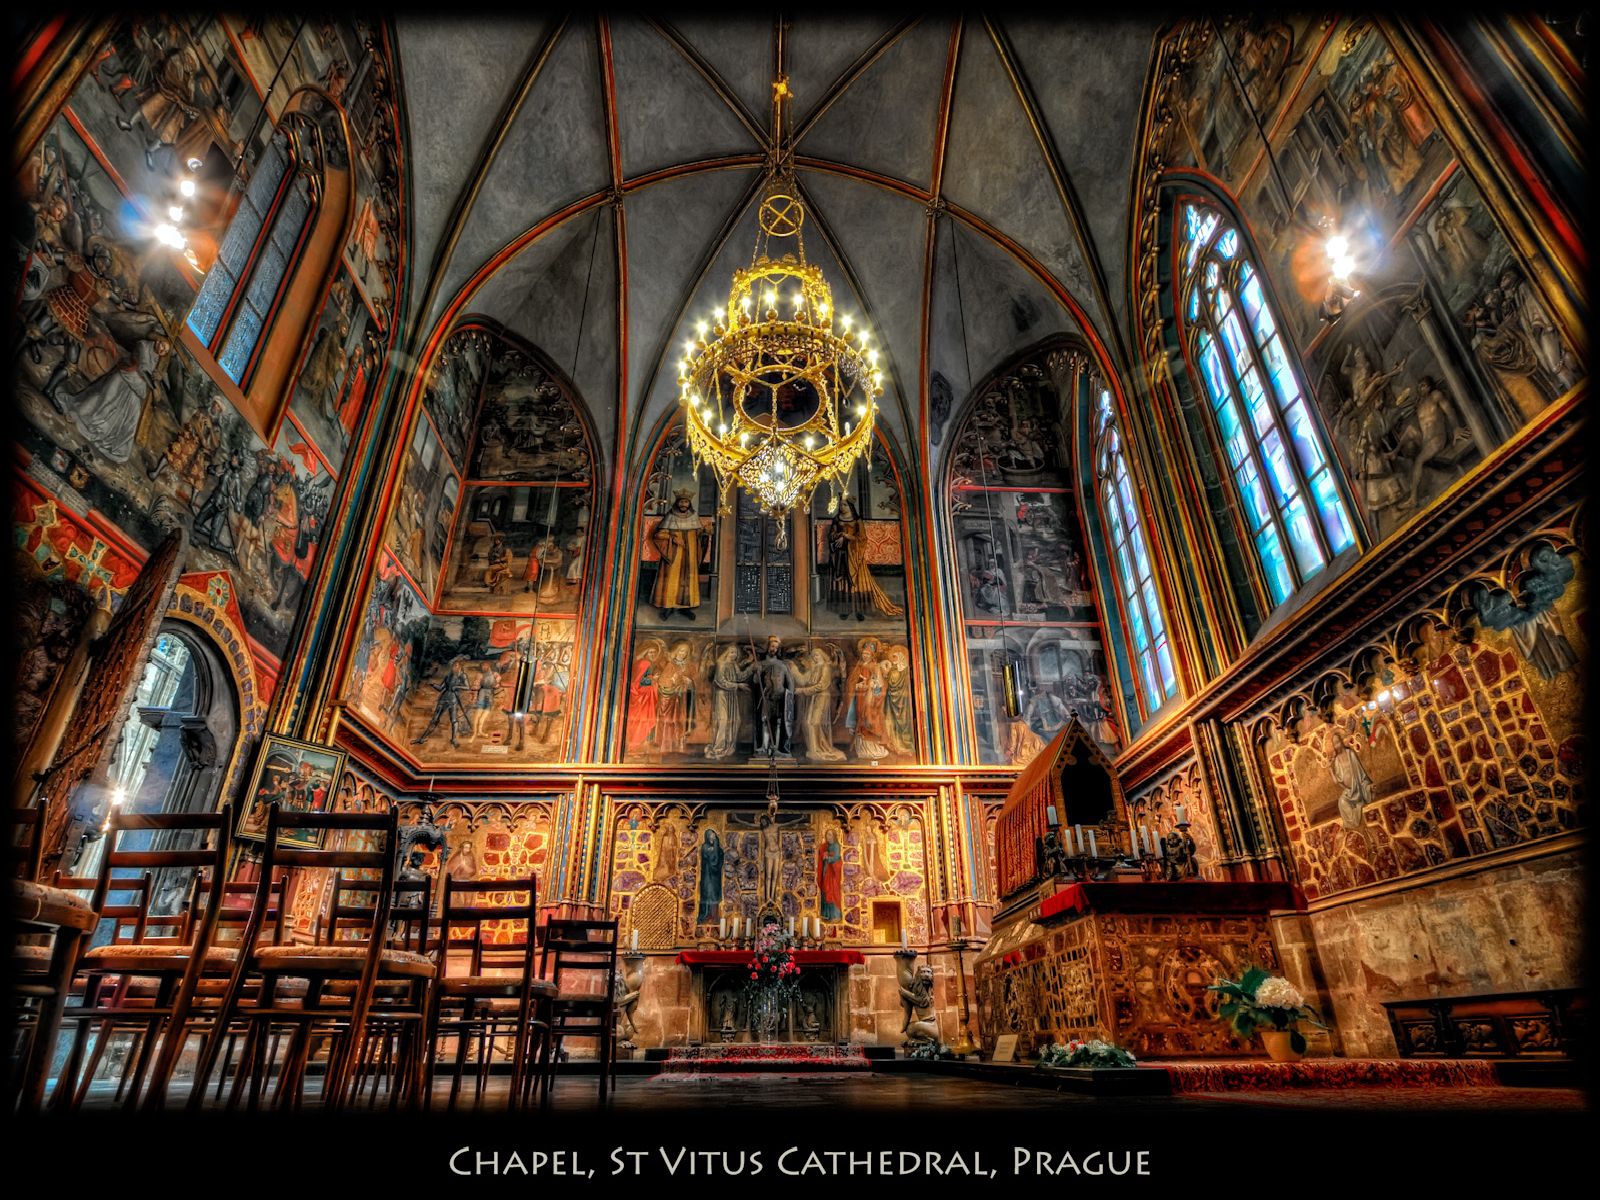 St. Vitus Cathedral in Prague by Pedro Szekely